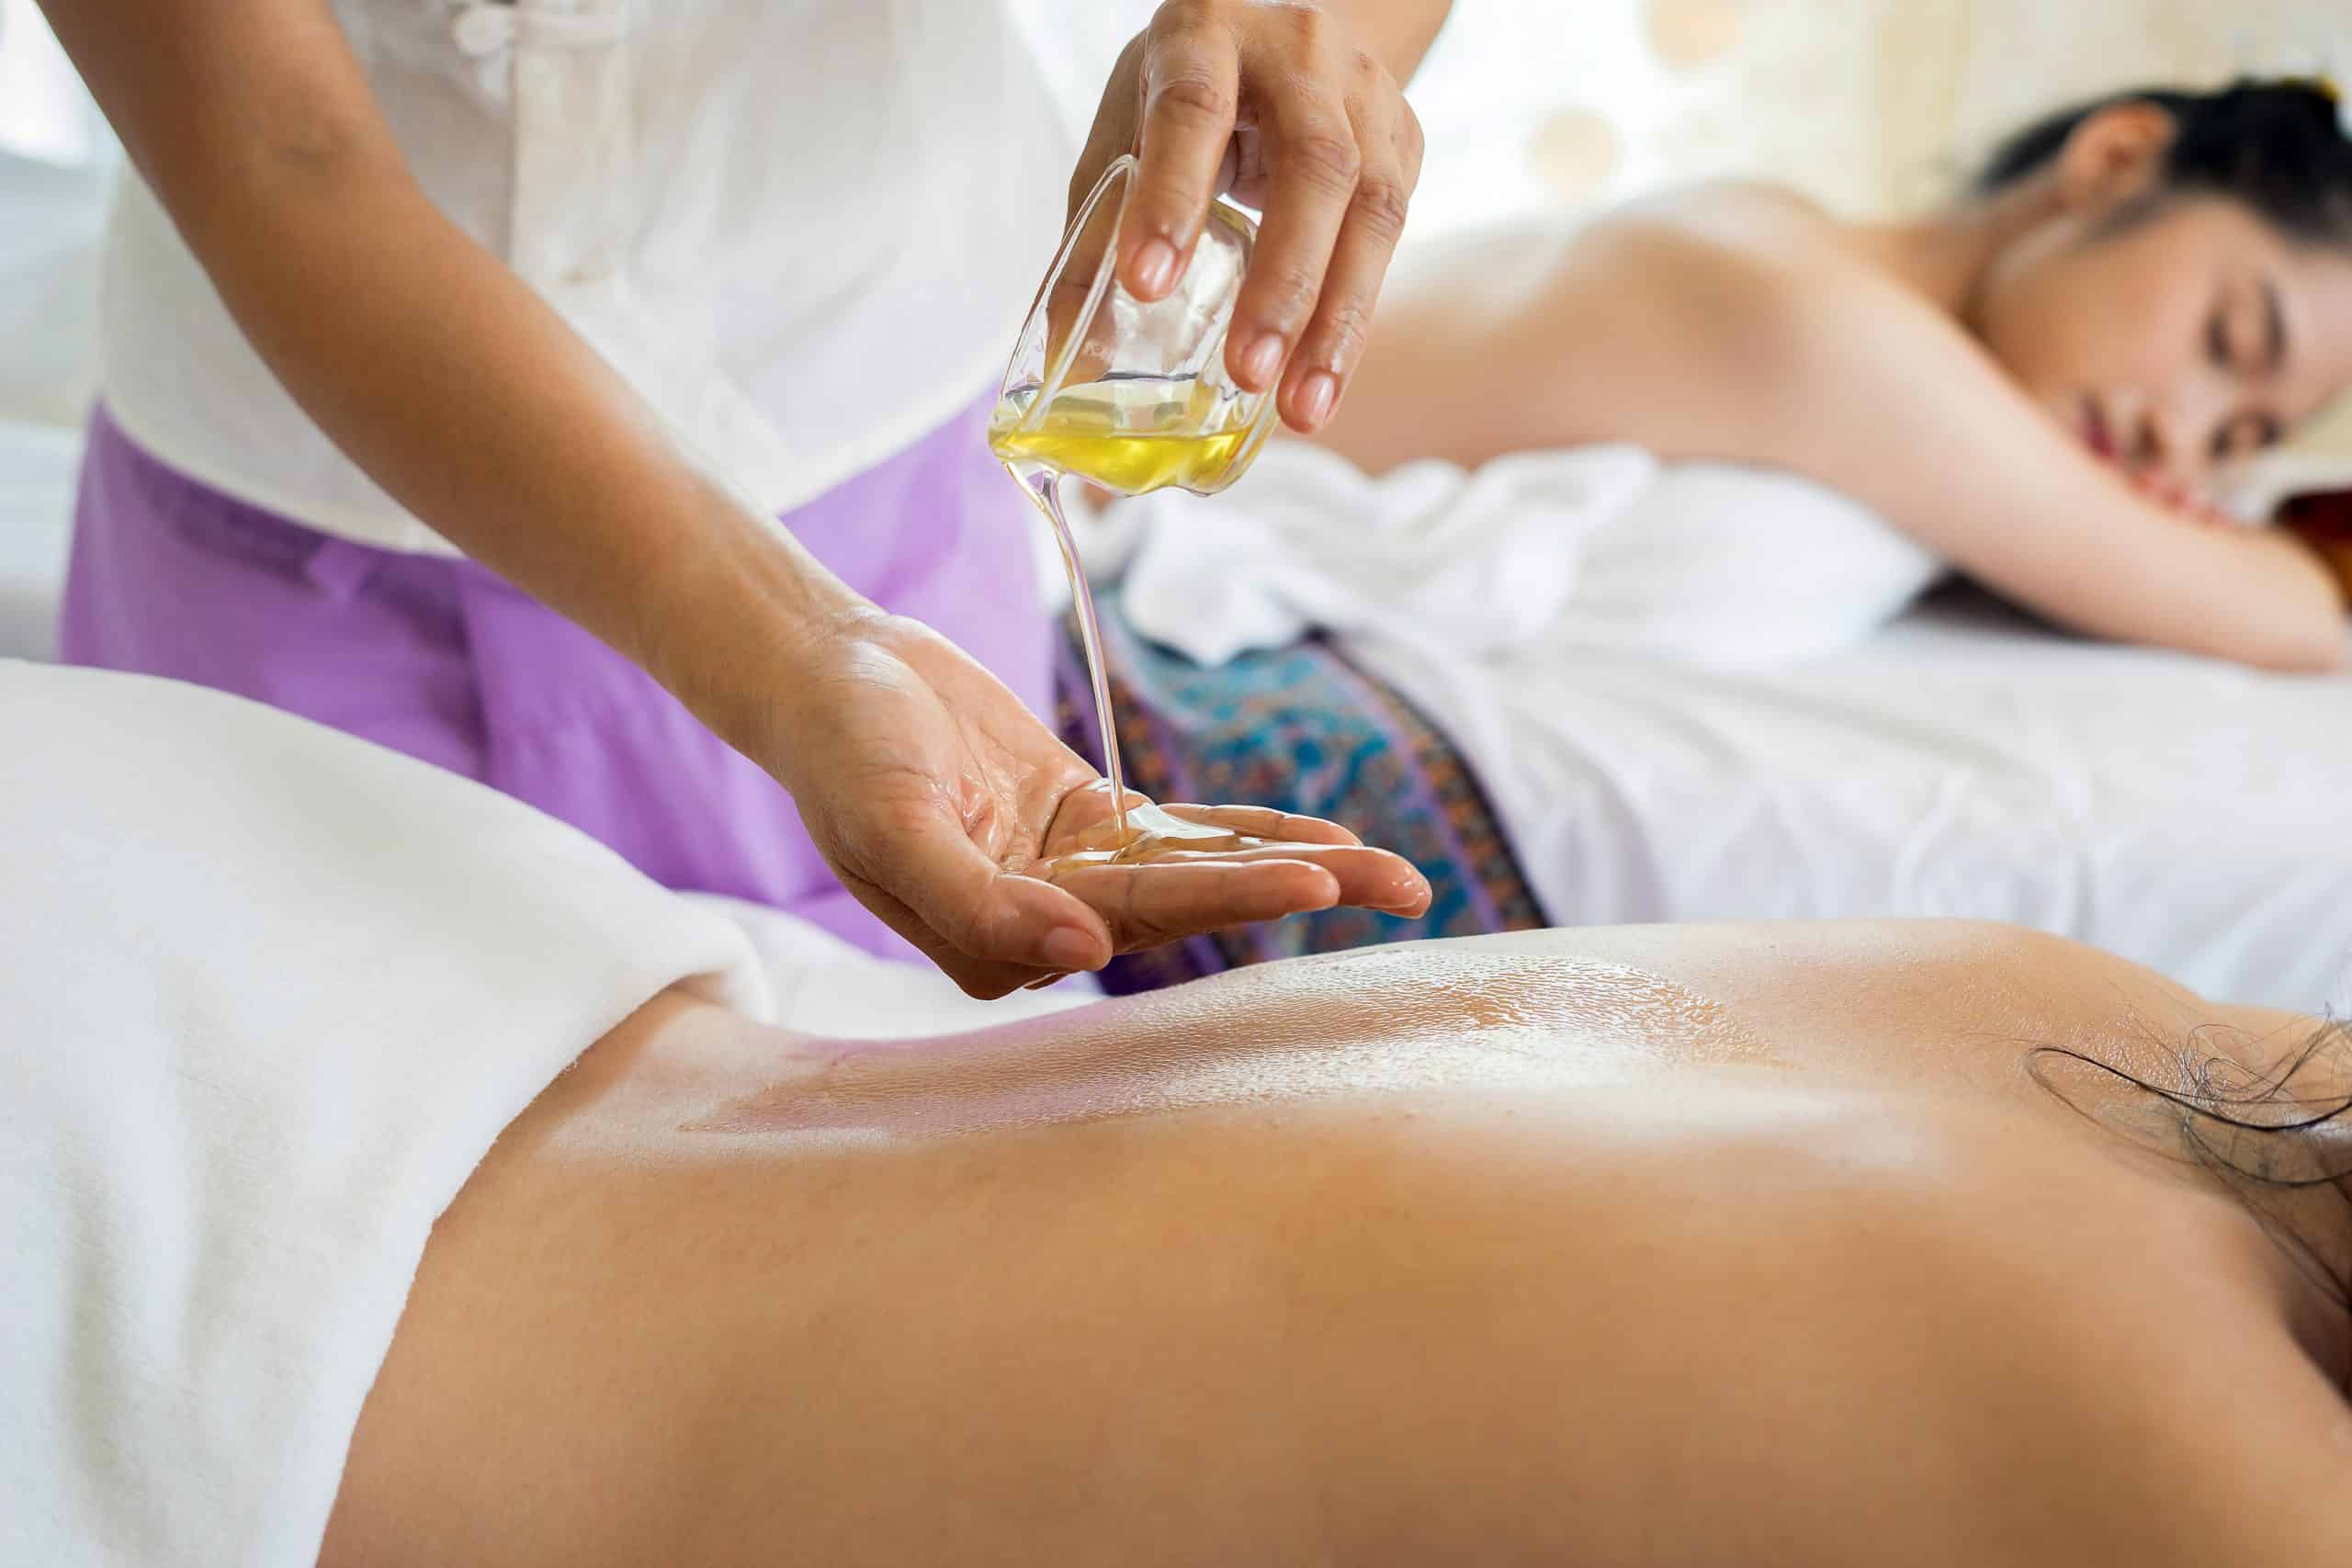 woman pouring oil on hand in preparation for massage.